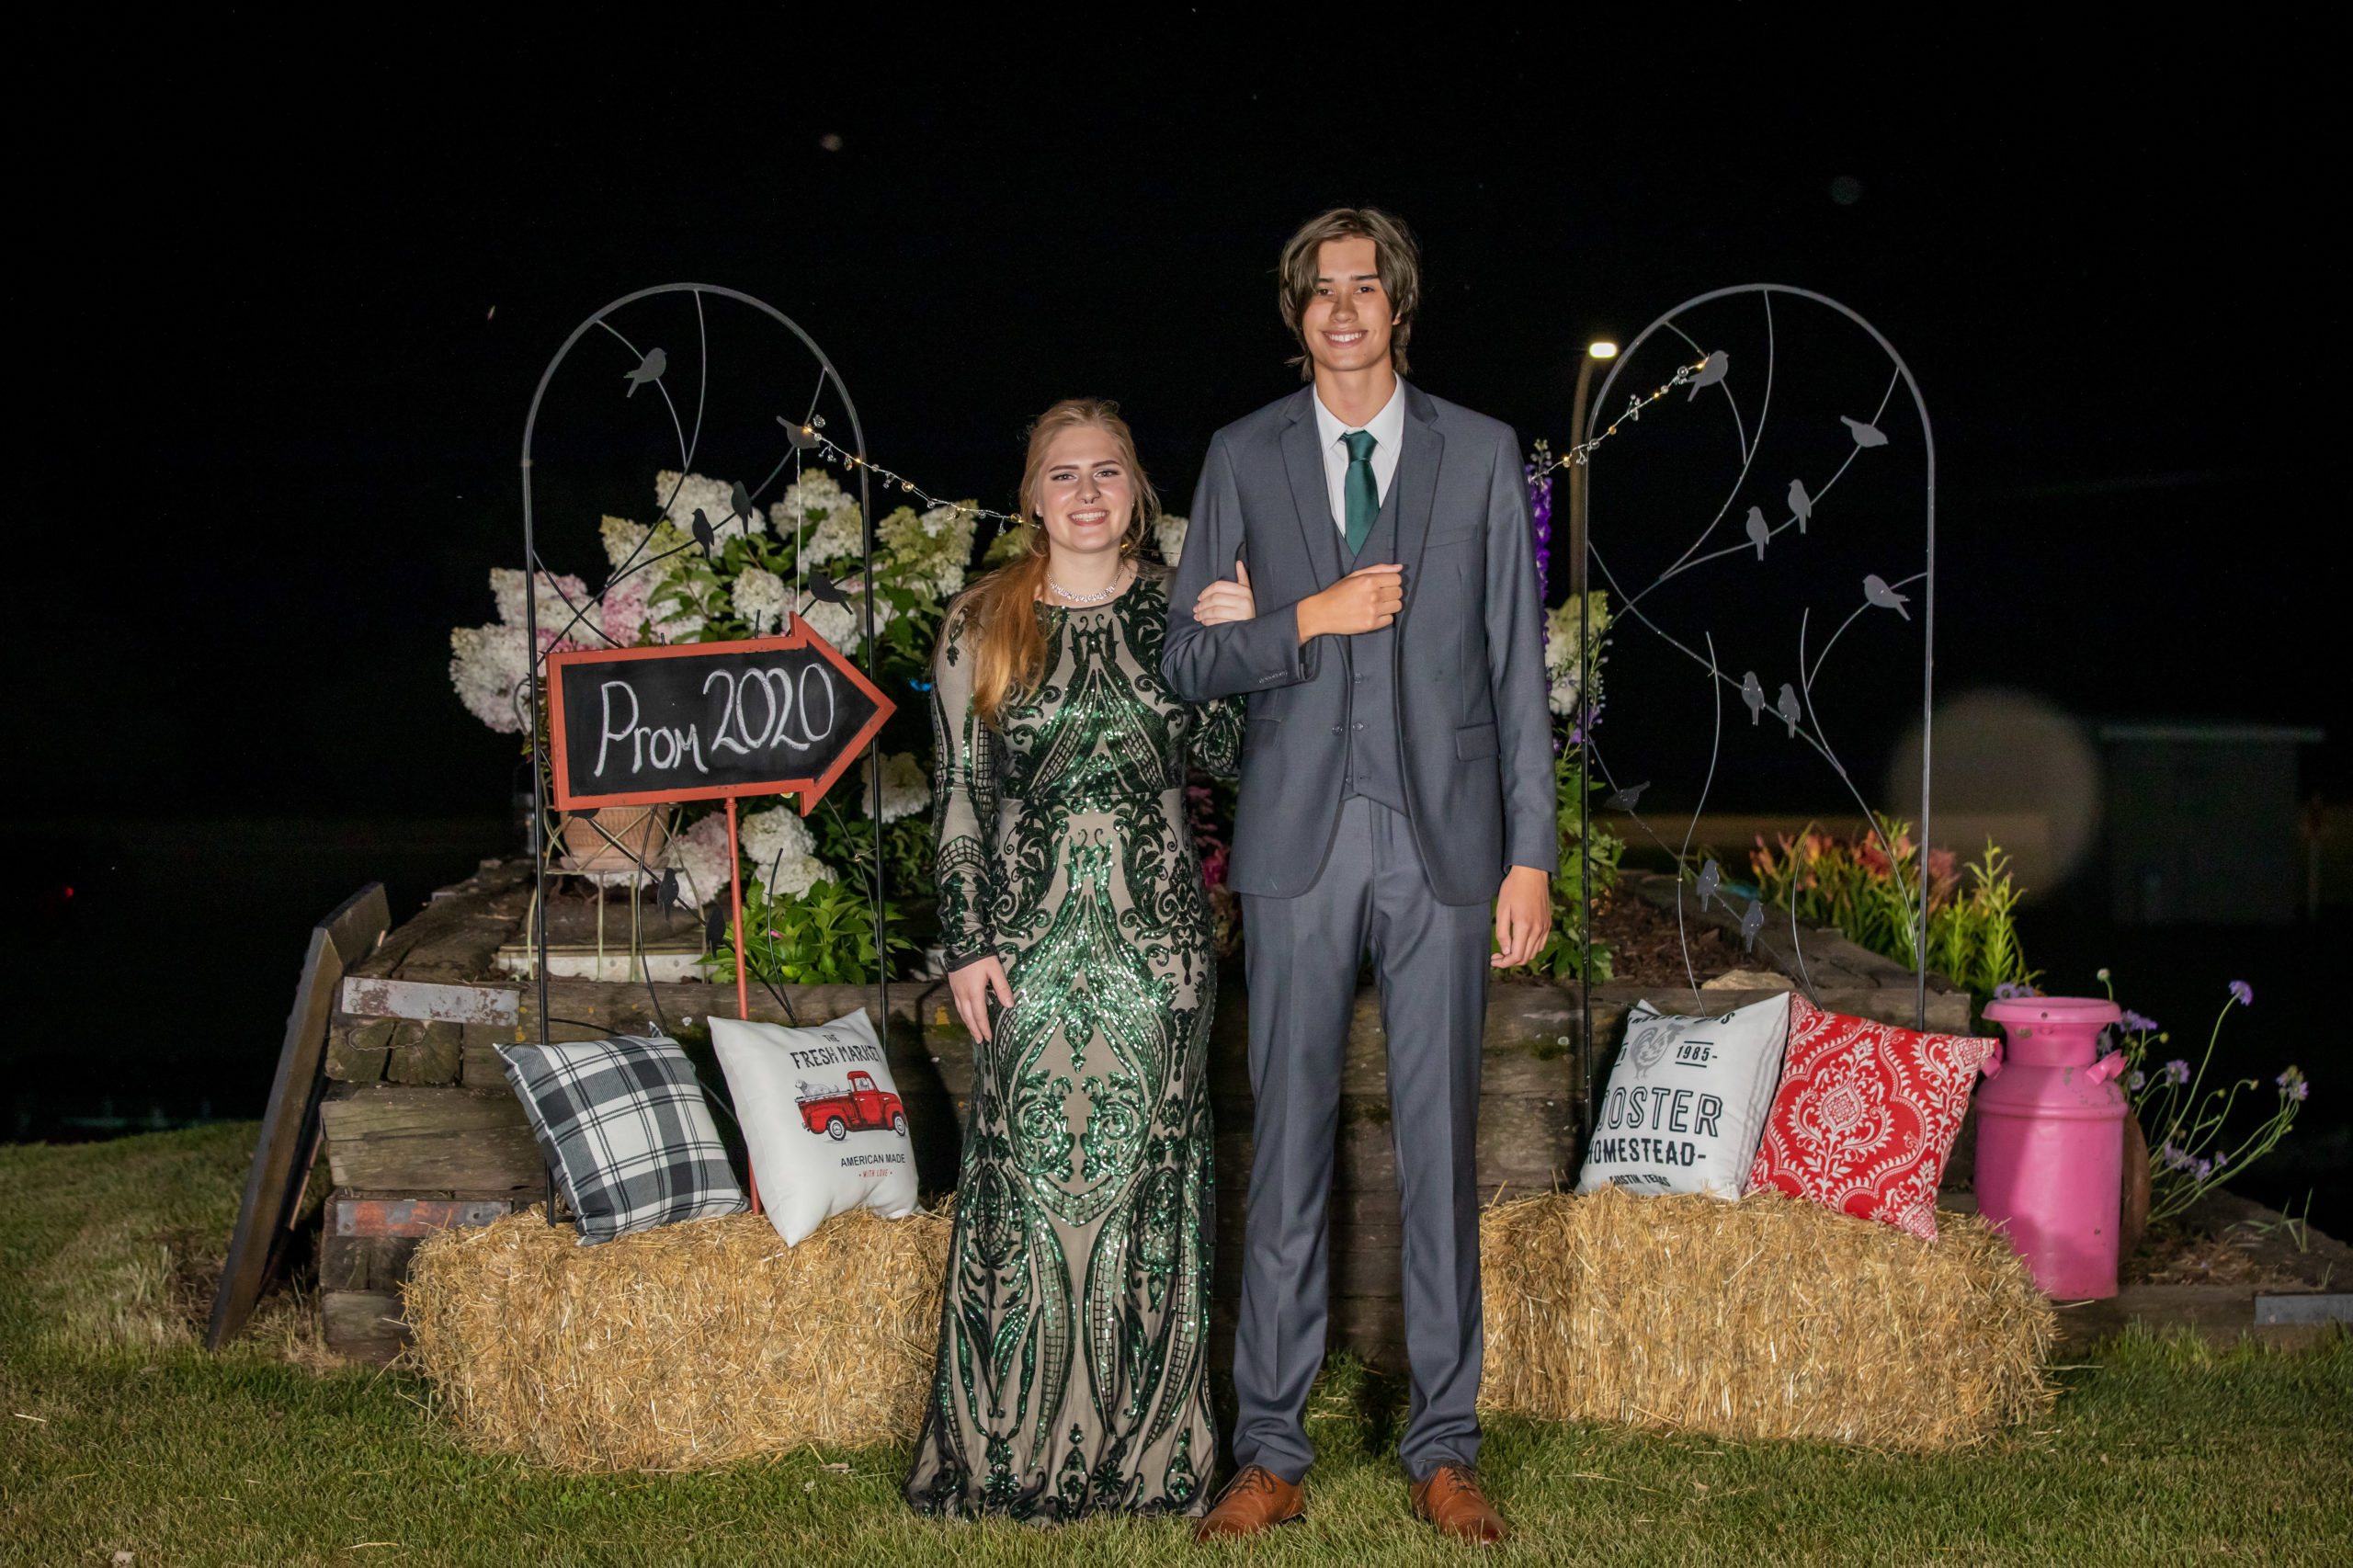 UHS Prom 2020 Celebrated Battle Lake Review Battle Lake Review